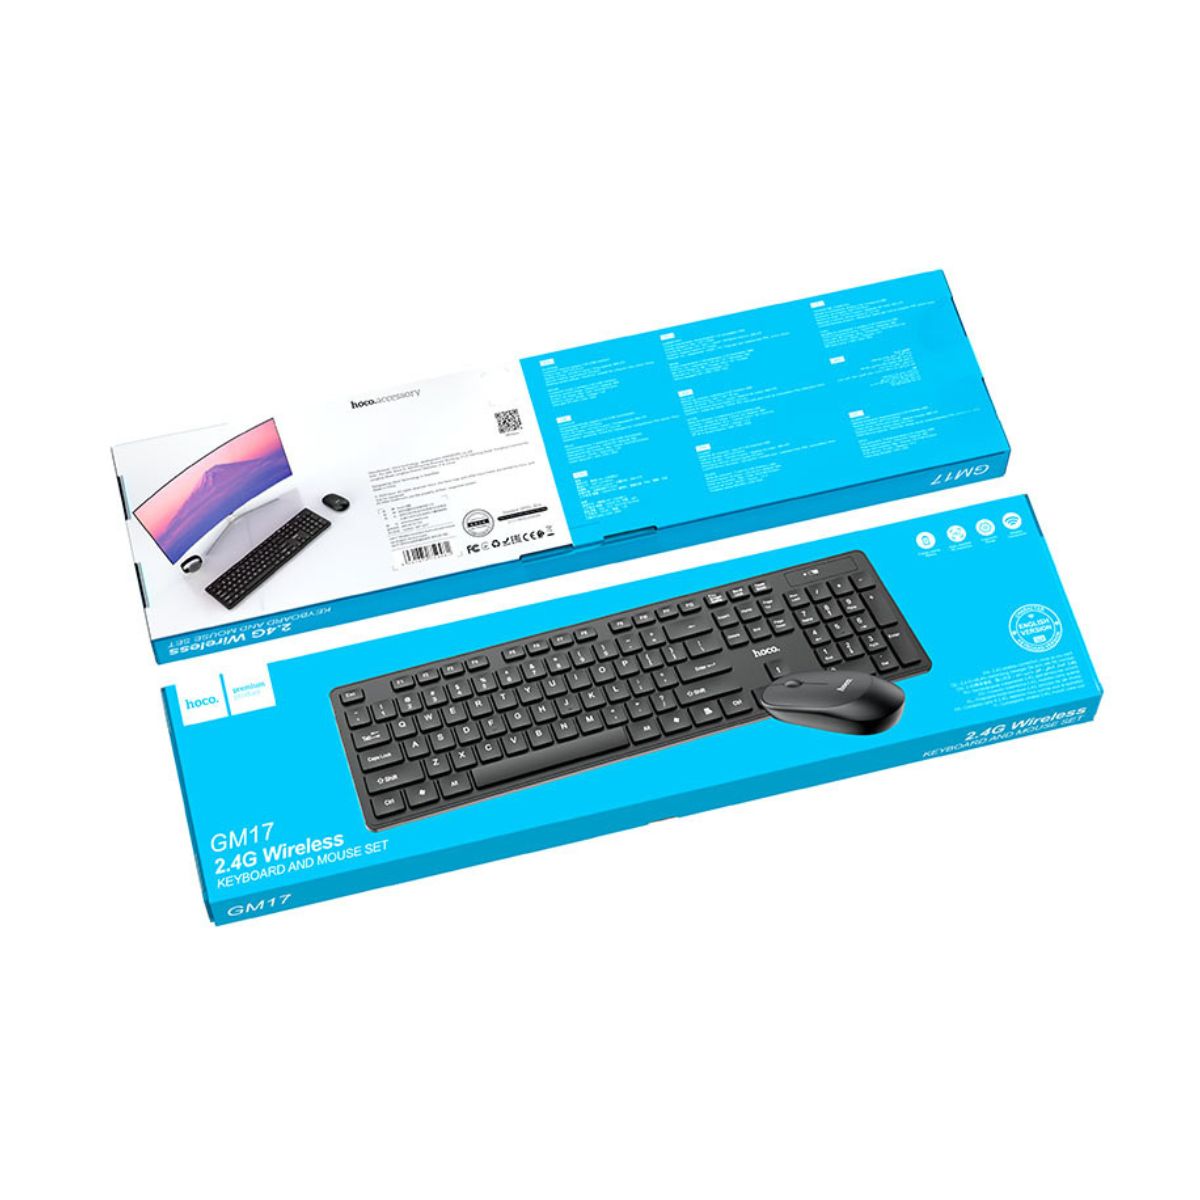 Hoco GM17 Wireless Business Keyboard And Mouse Set(English Version) - Black